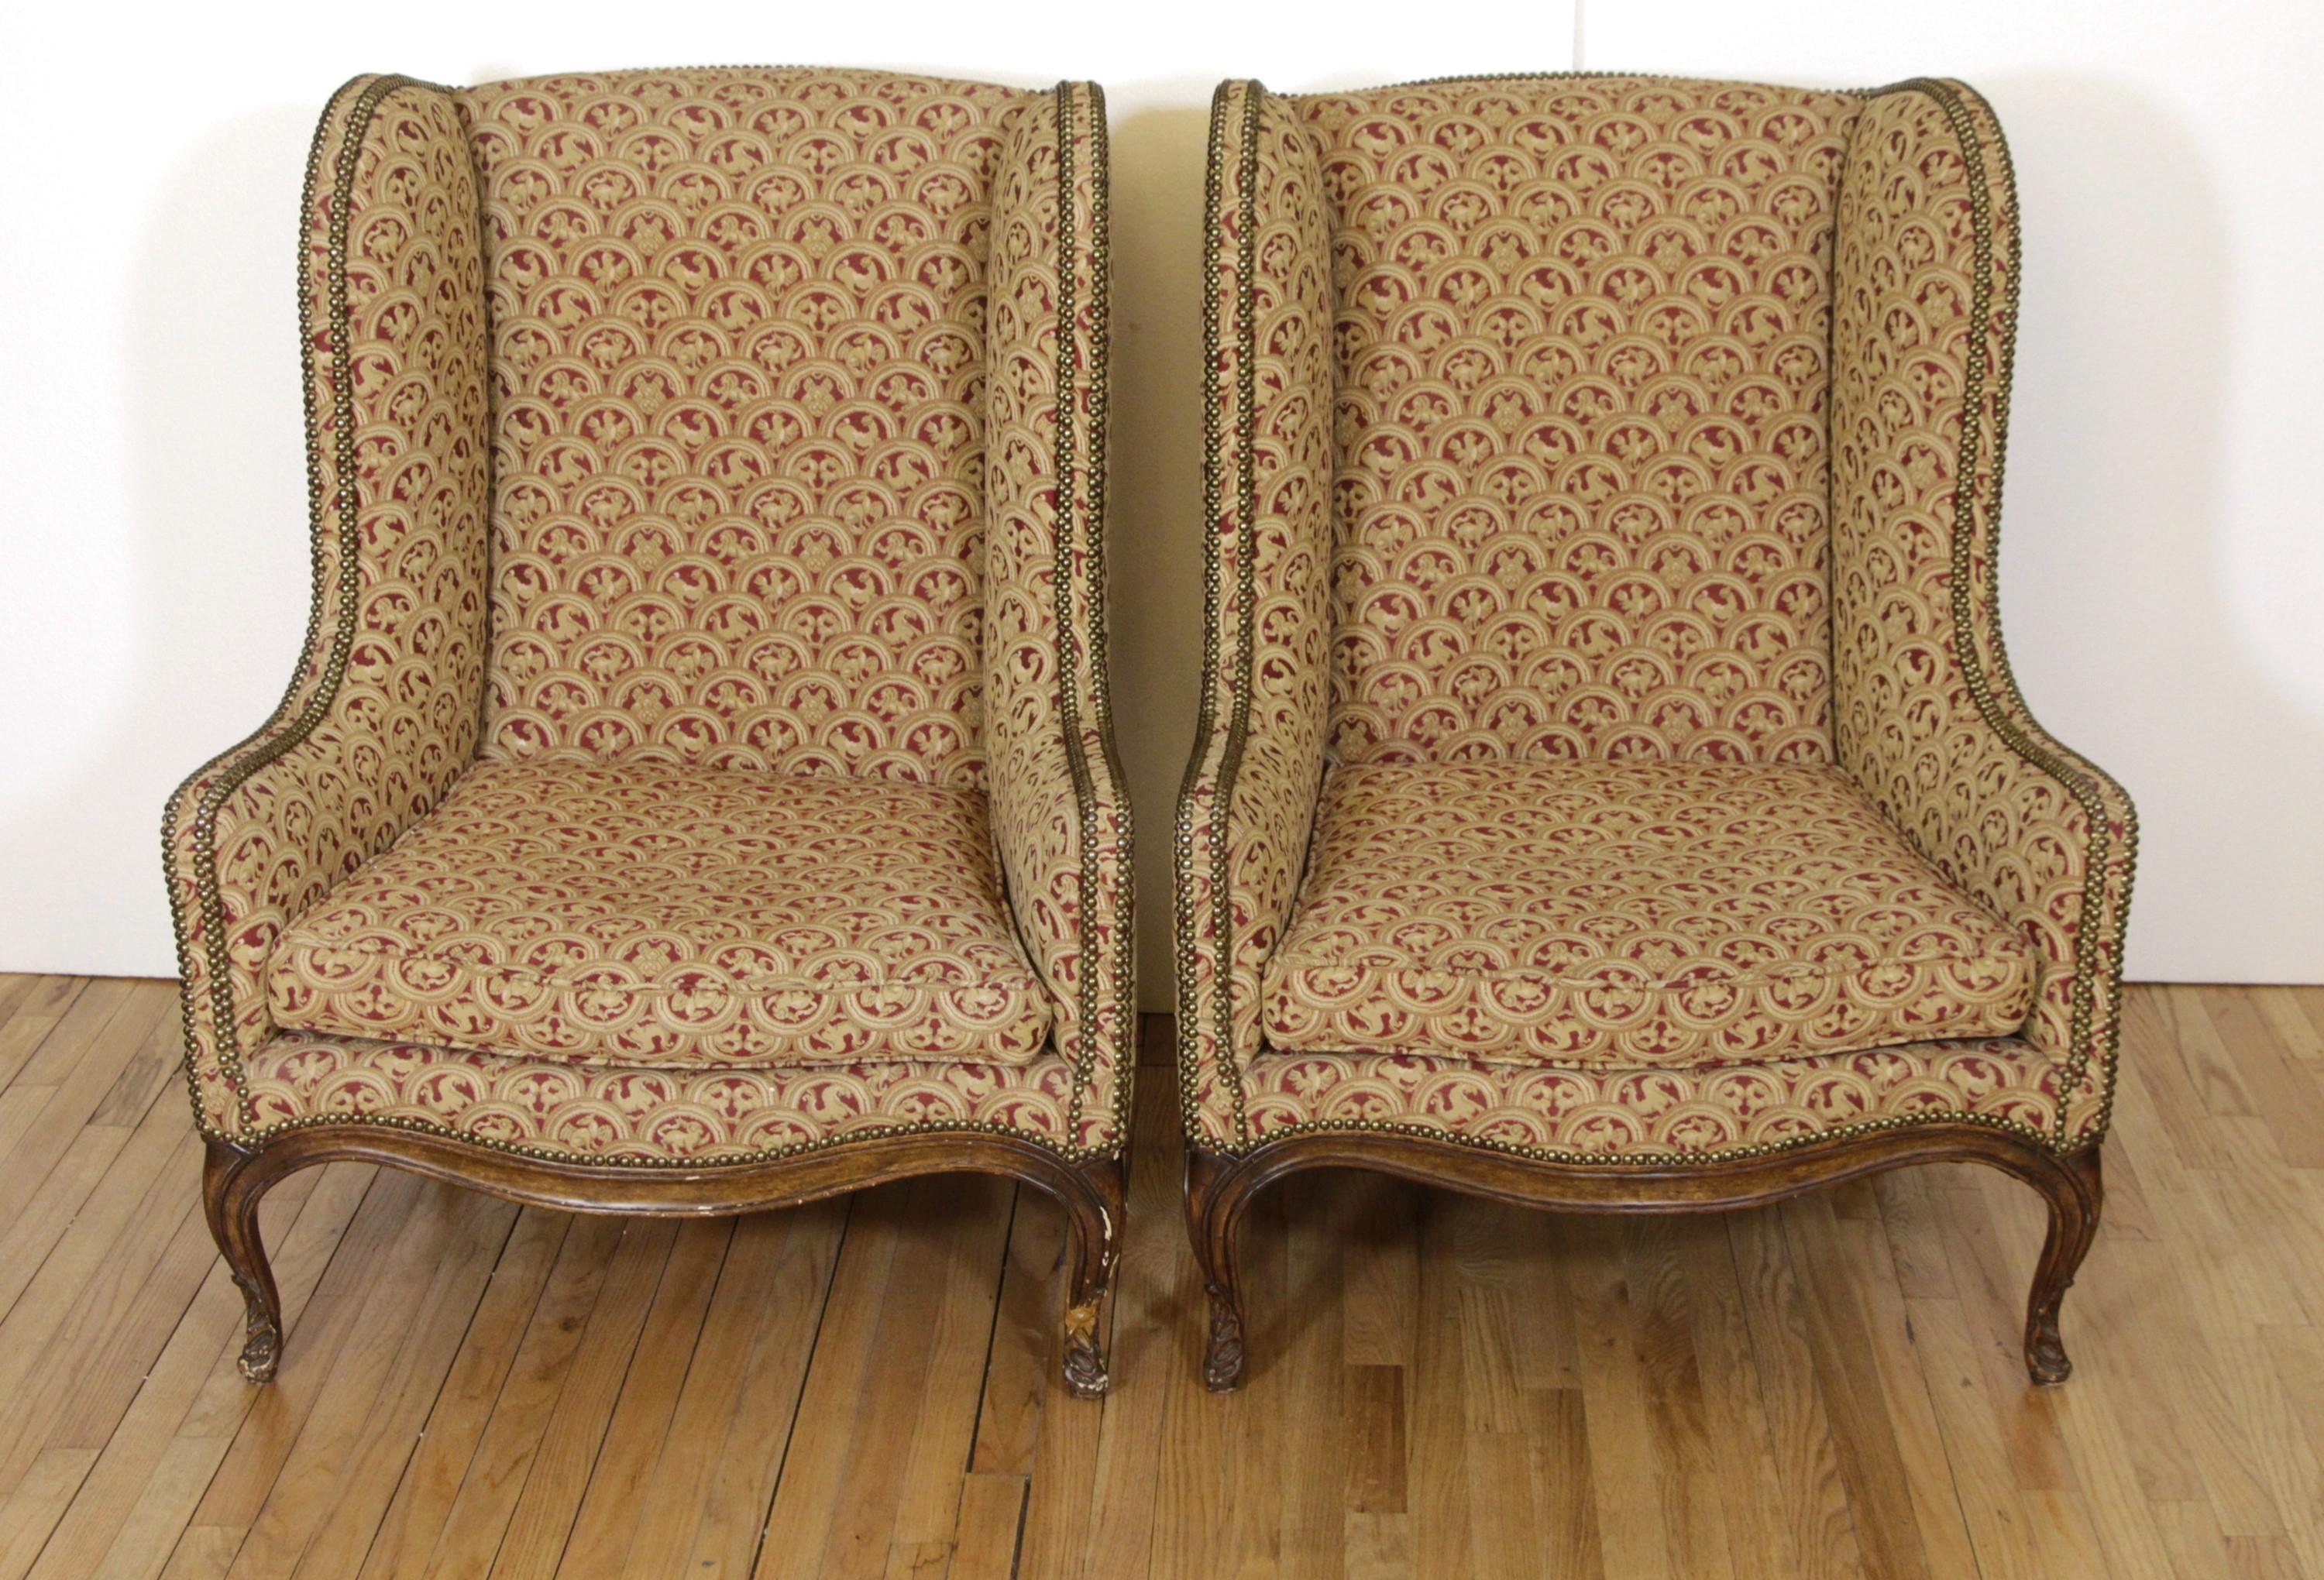 A pair of 20th century winged-back and upholstered armchairs with a finely carved wood base. The upholstery consists of semi-circle red and beige figural details. There are brass studs along the arms and sides. This can be seen at our 333 West 52nd